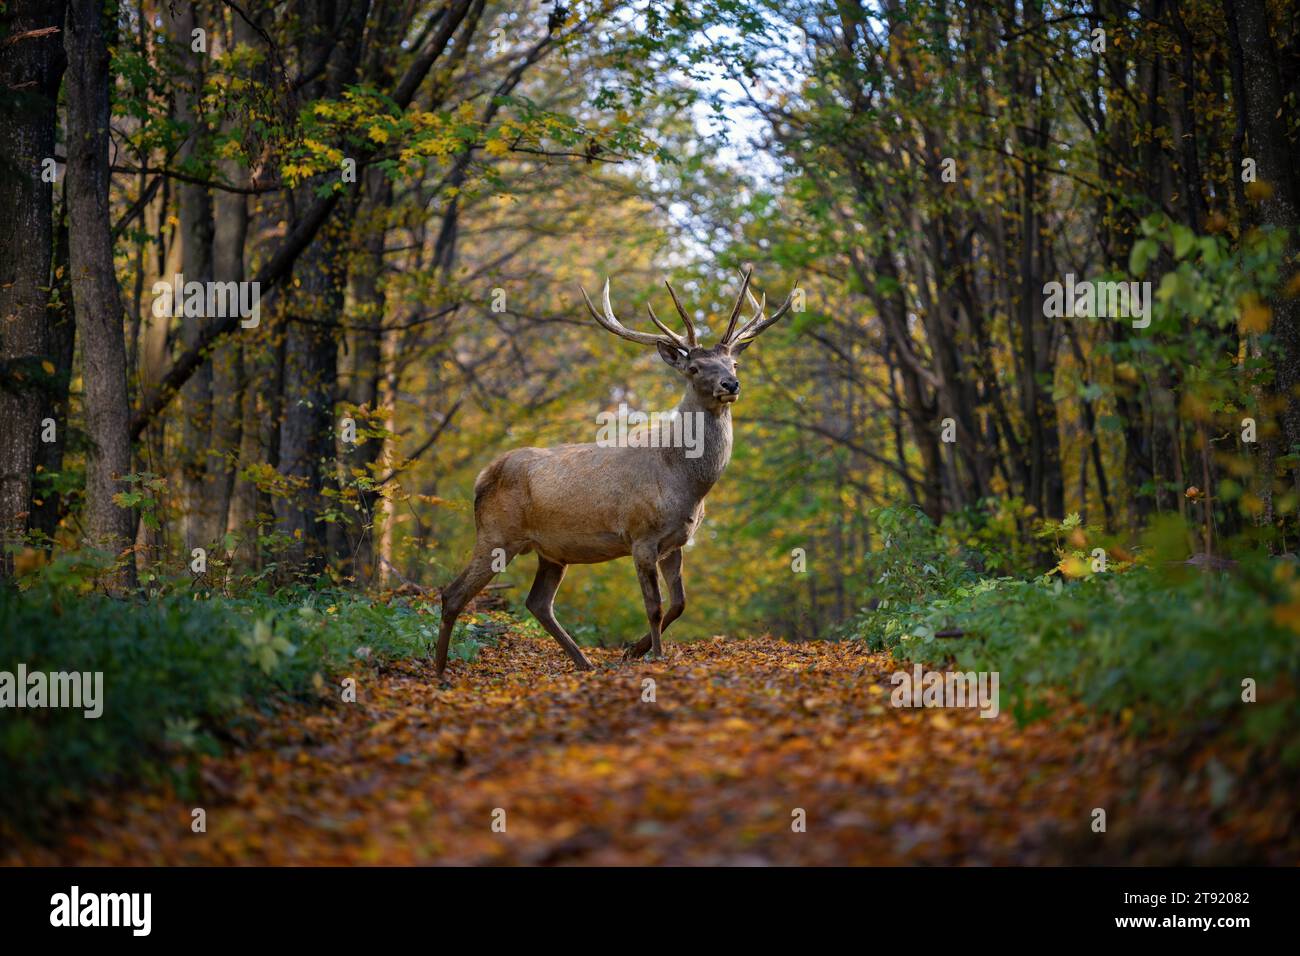 Majestic deer with big horns stag in autumn forest. Wildlife scene from nature Stock Photo